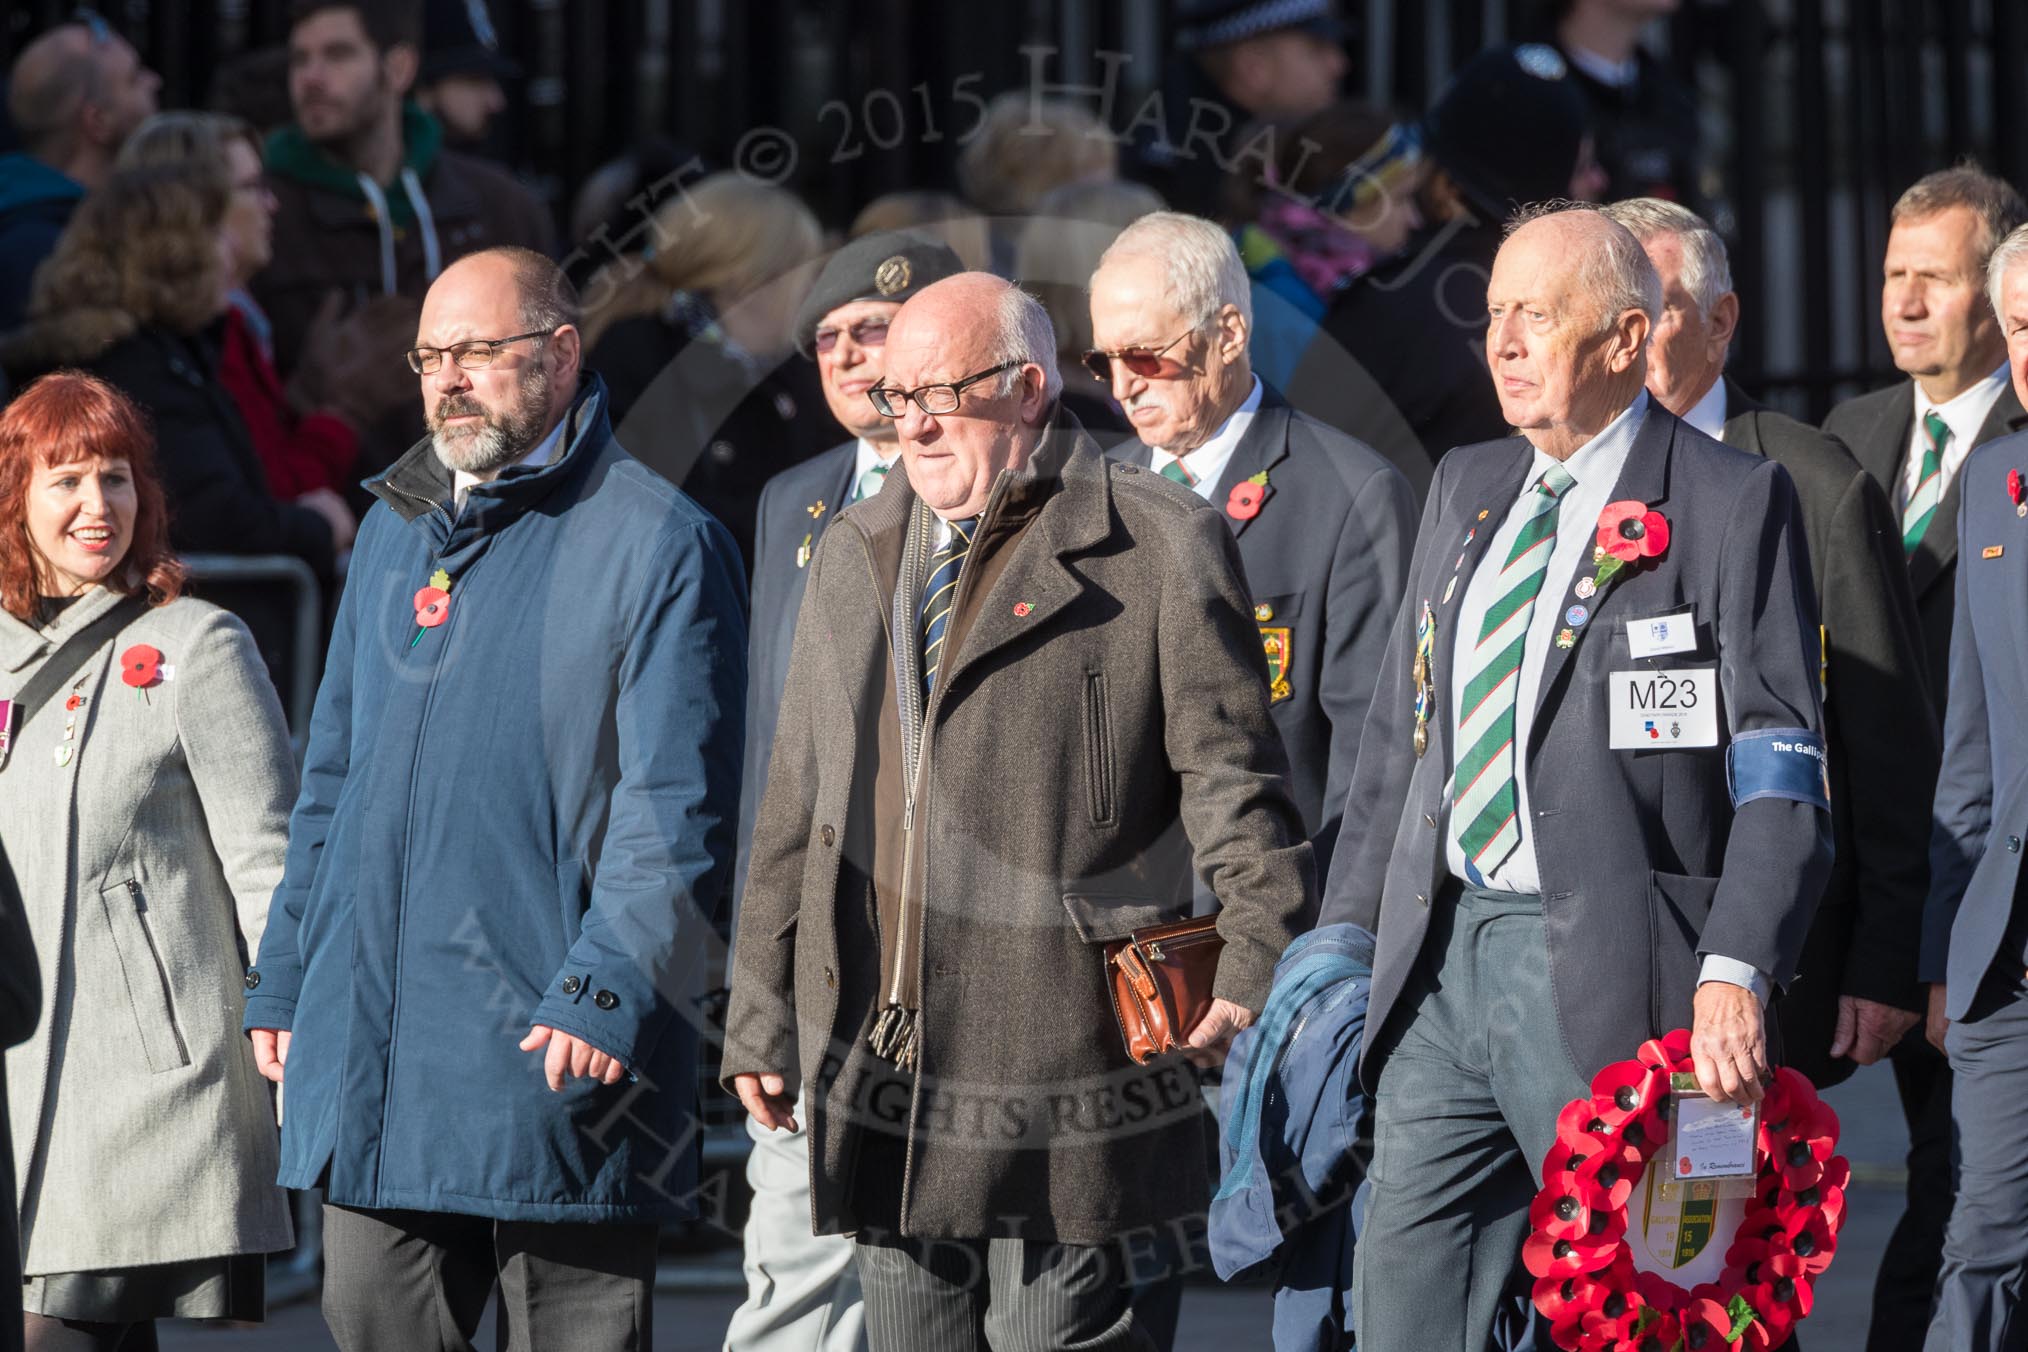 March Past, Remembrance Sunday at the Cenotaph 2016: M23 Gallipoli Association.
Cenotaph, Whitehall, London SW1,
London,
Greater London,
United Kingdom,
on 13 November 2016 at 13:16, image #2690